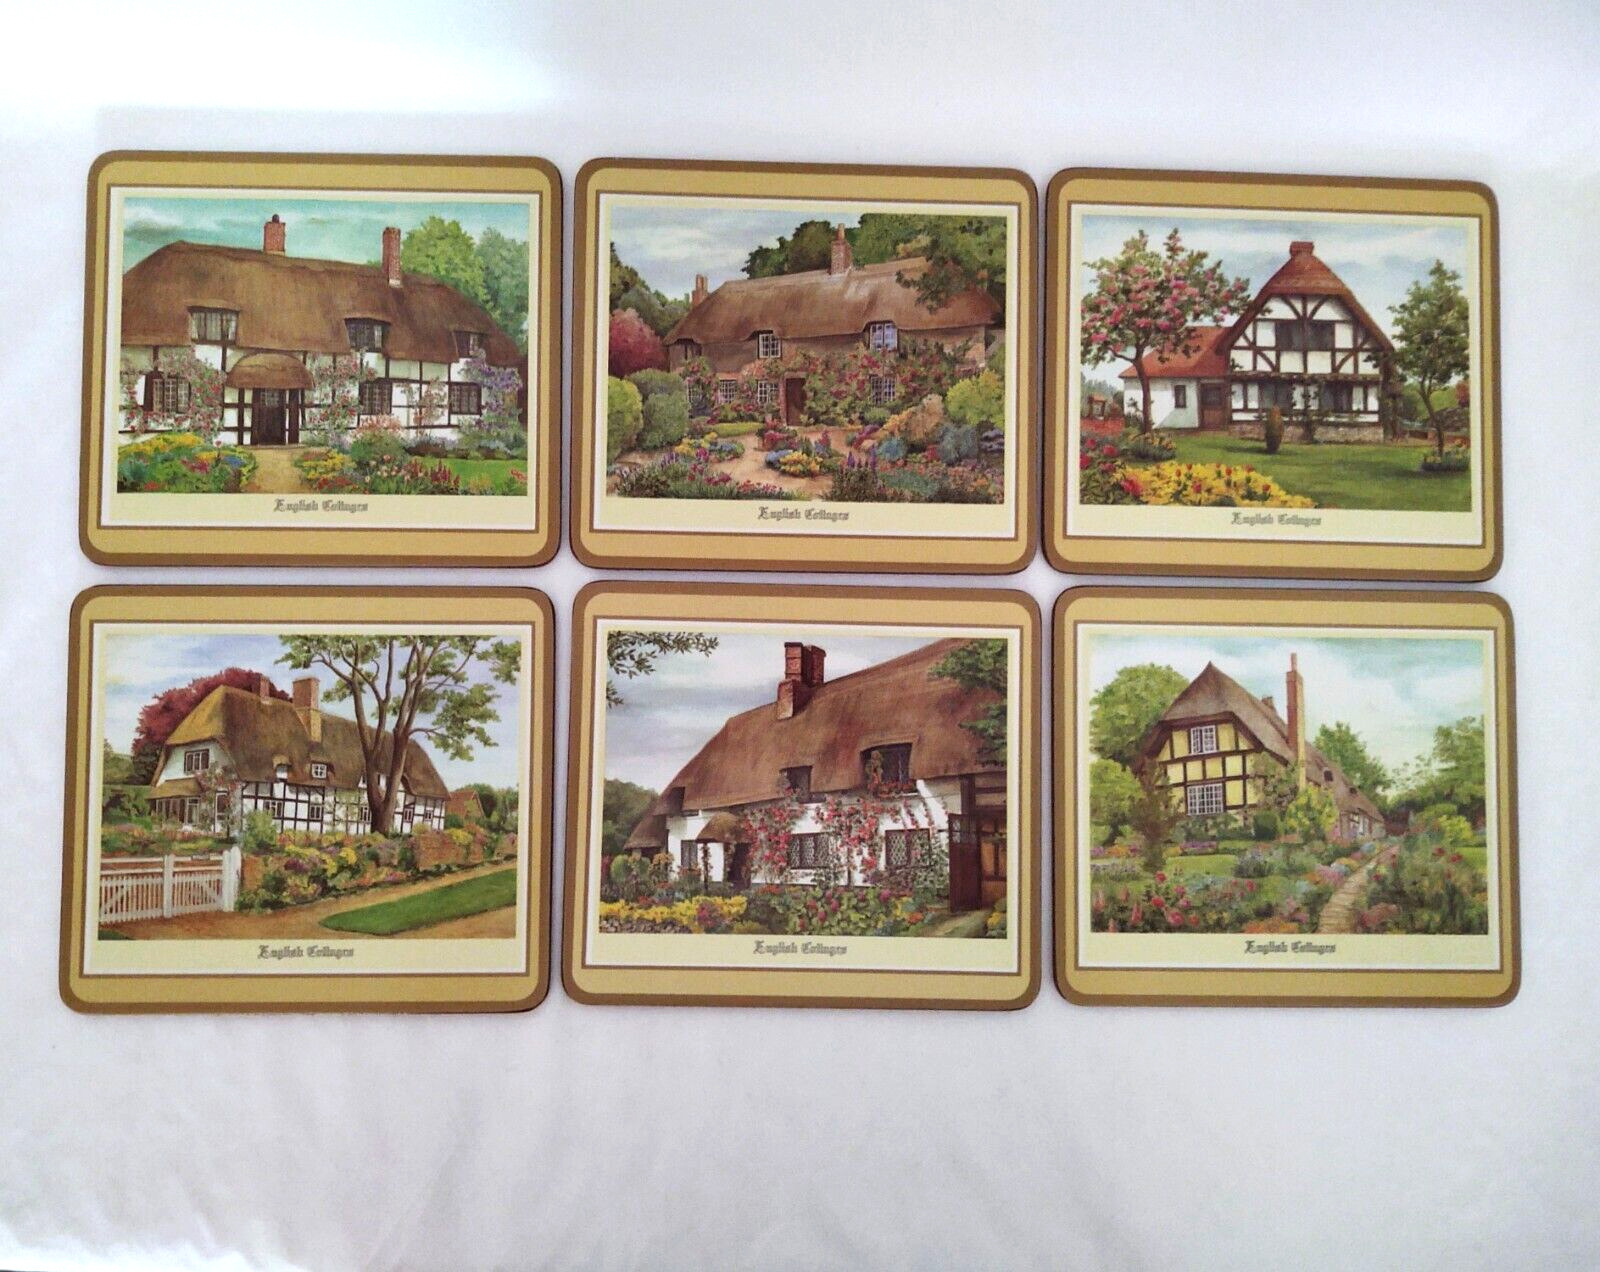 Pimpernel DeLuxe Finish Cork Placemats Vintage English Cottages New Set of 6